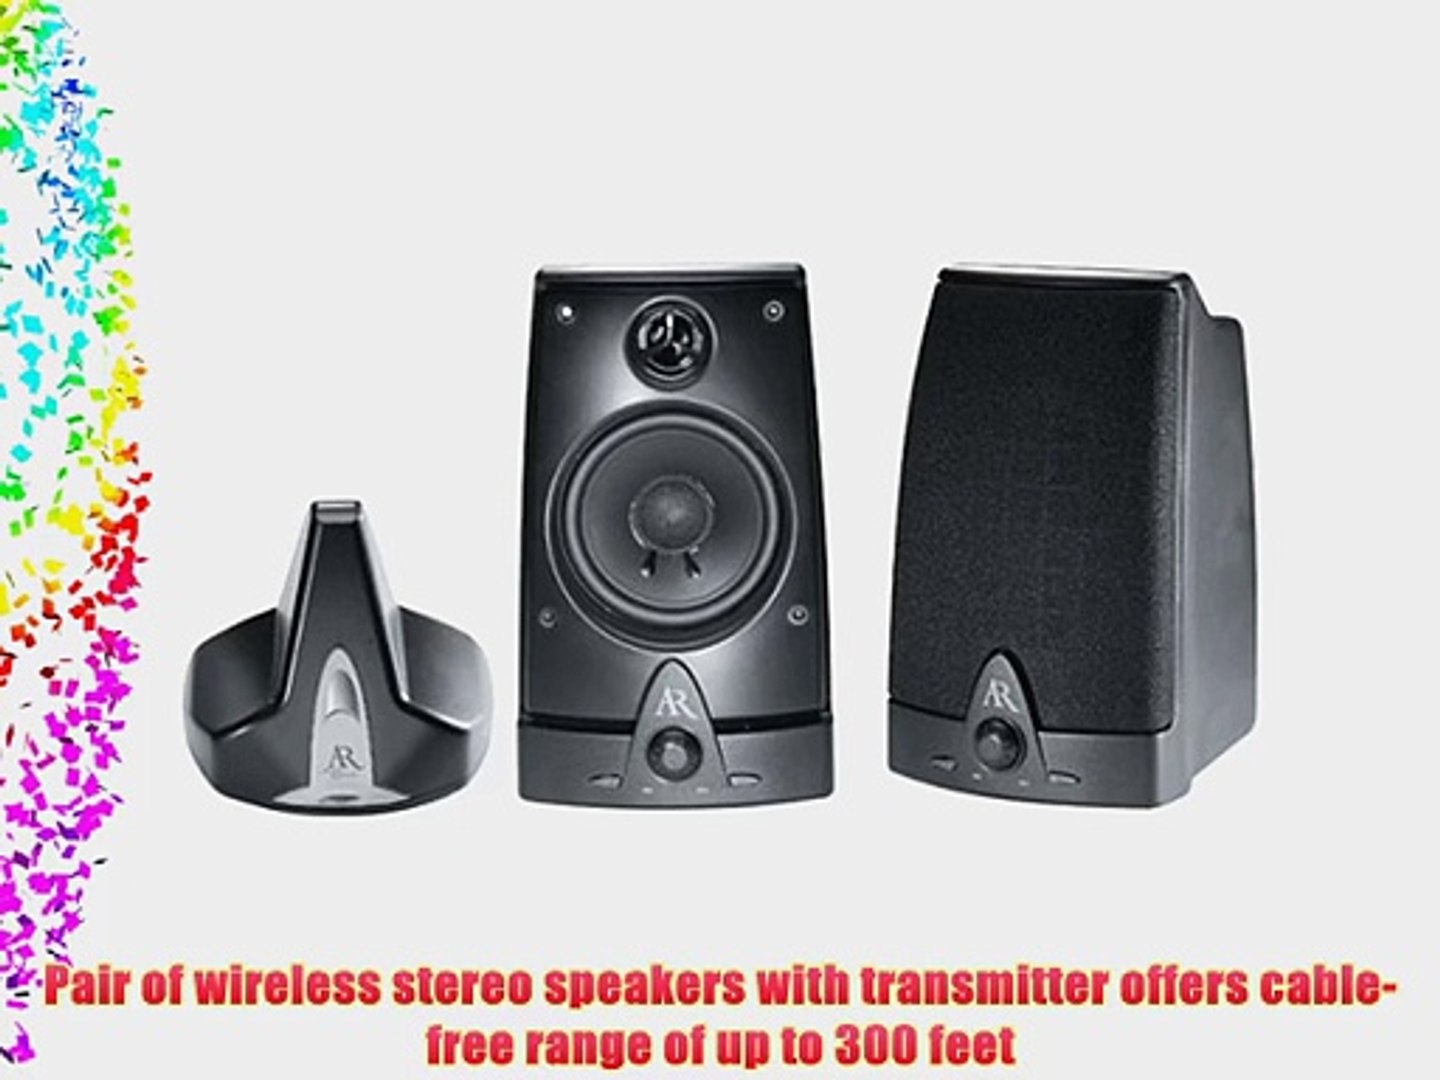 Acoustic Research AW-871 Wireless Stereo Speakers - video Dailymotion